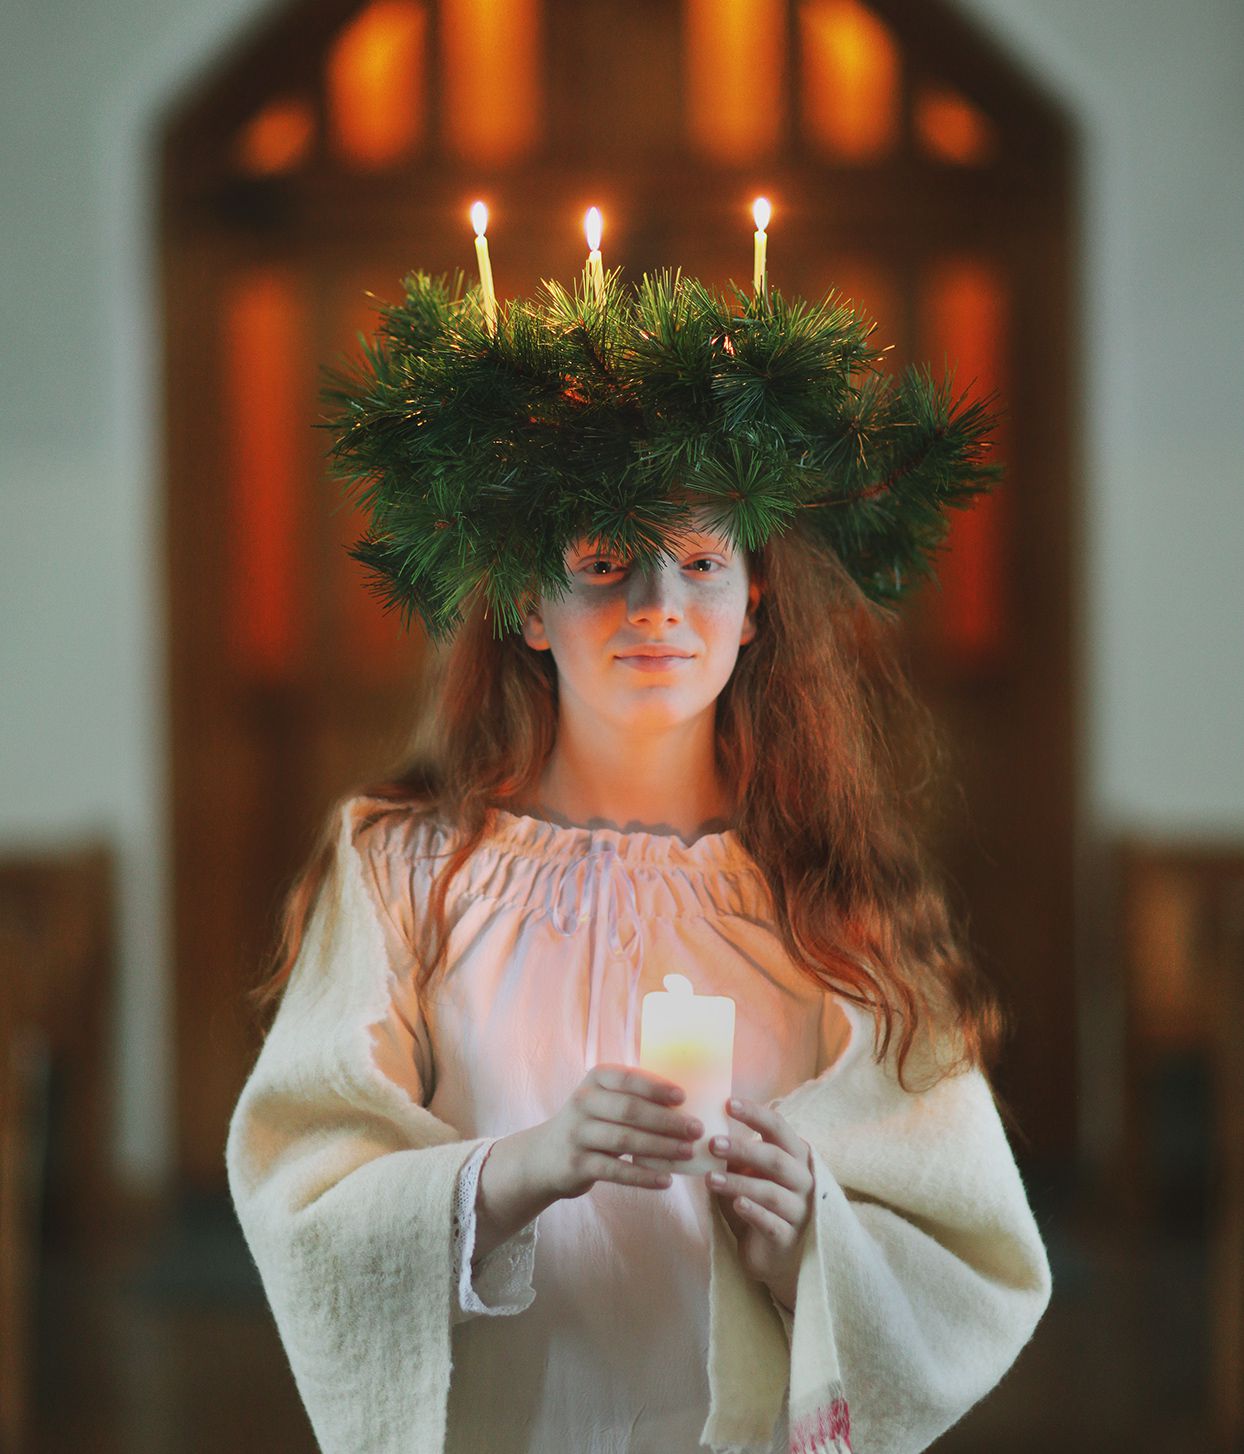 How to celebrate santa lucia day the traditional swedish way